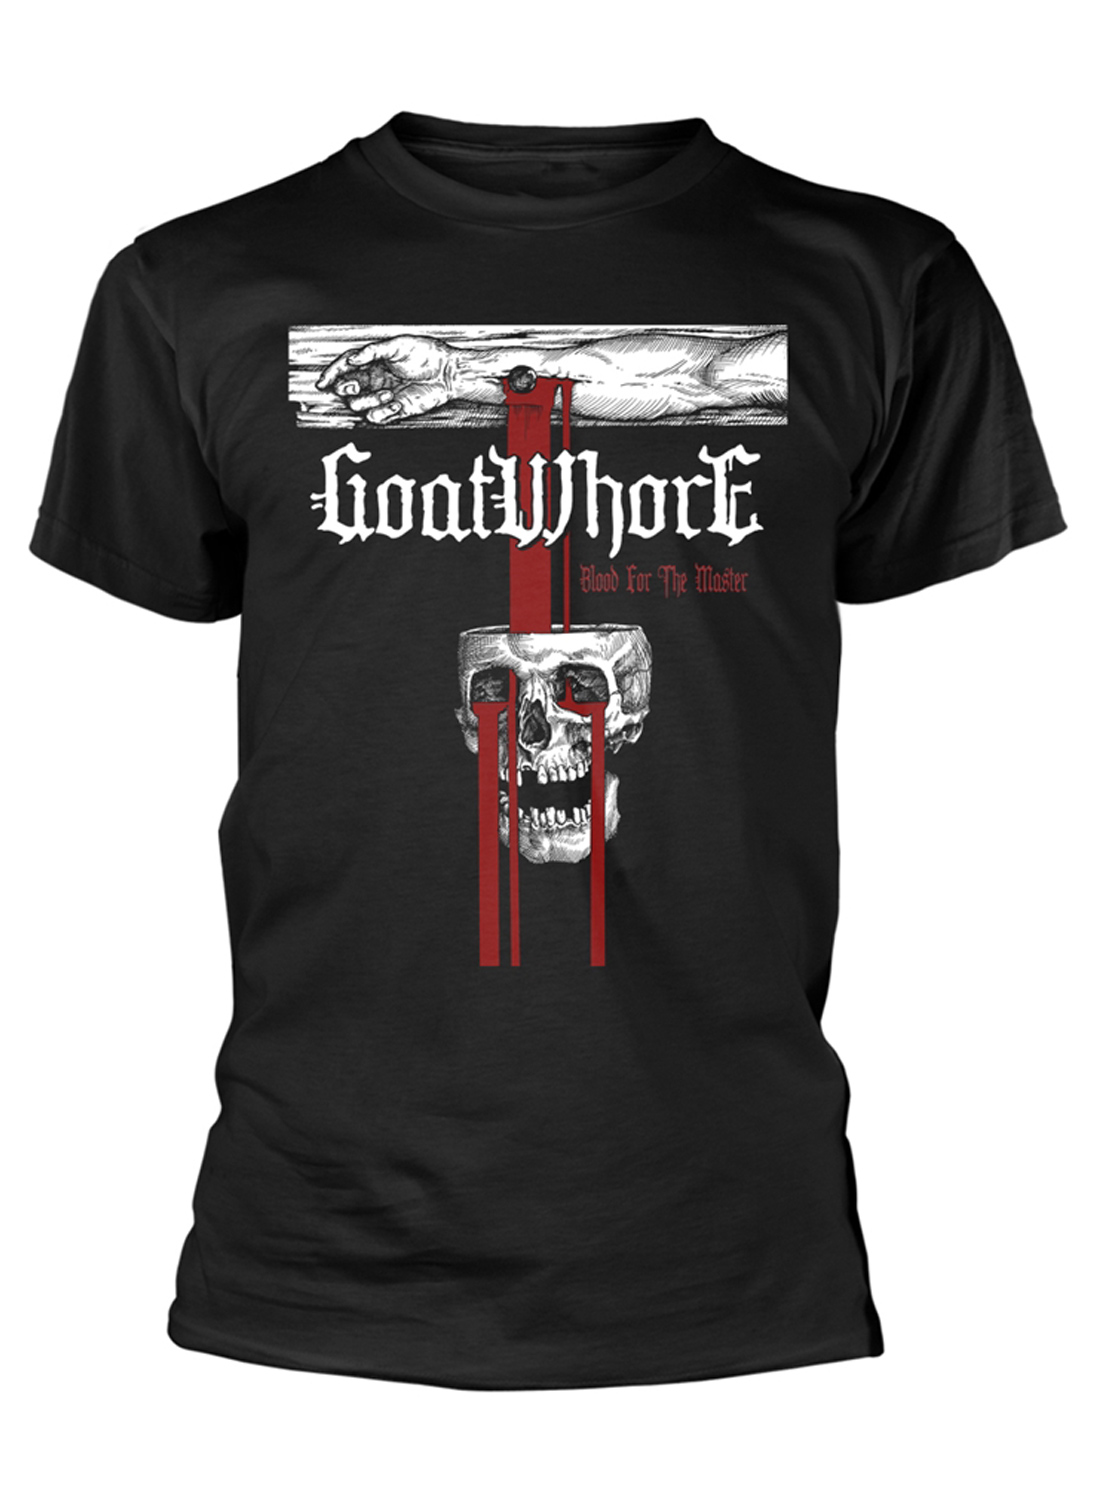 Goatwhore Blood for The Master T-shirt